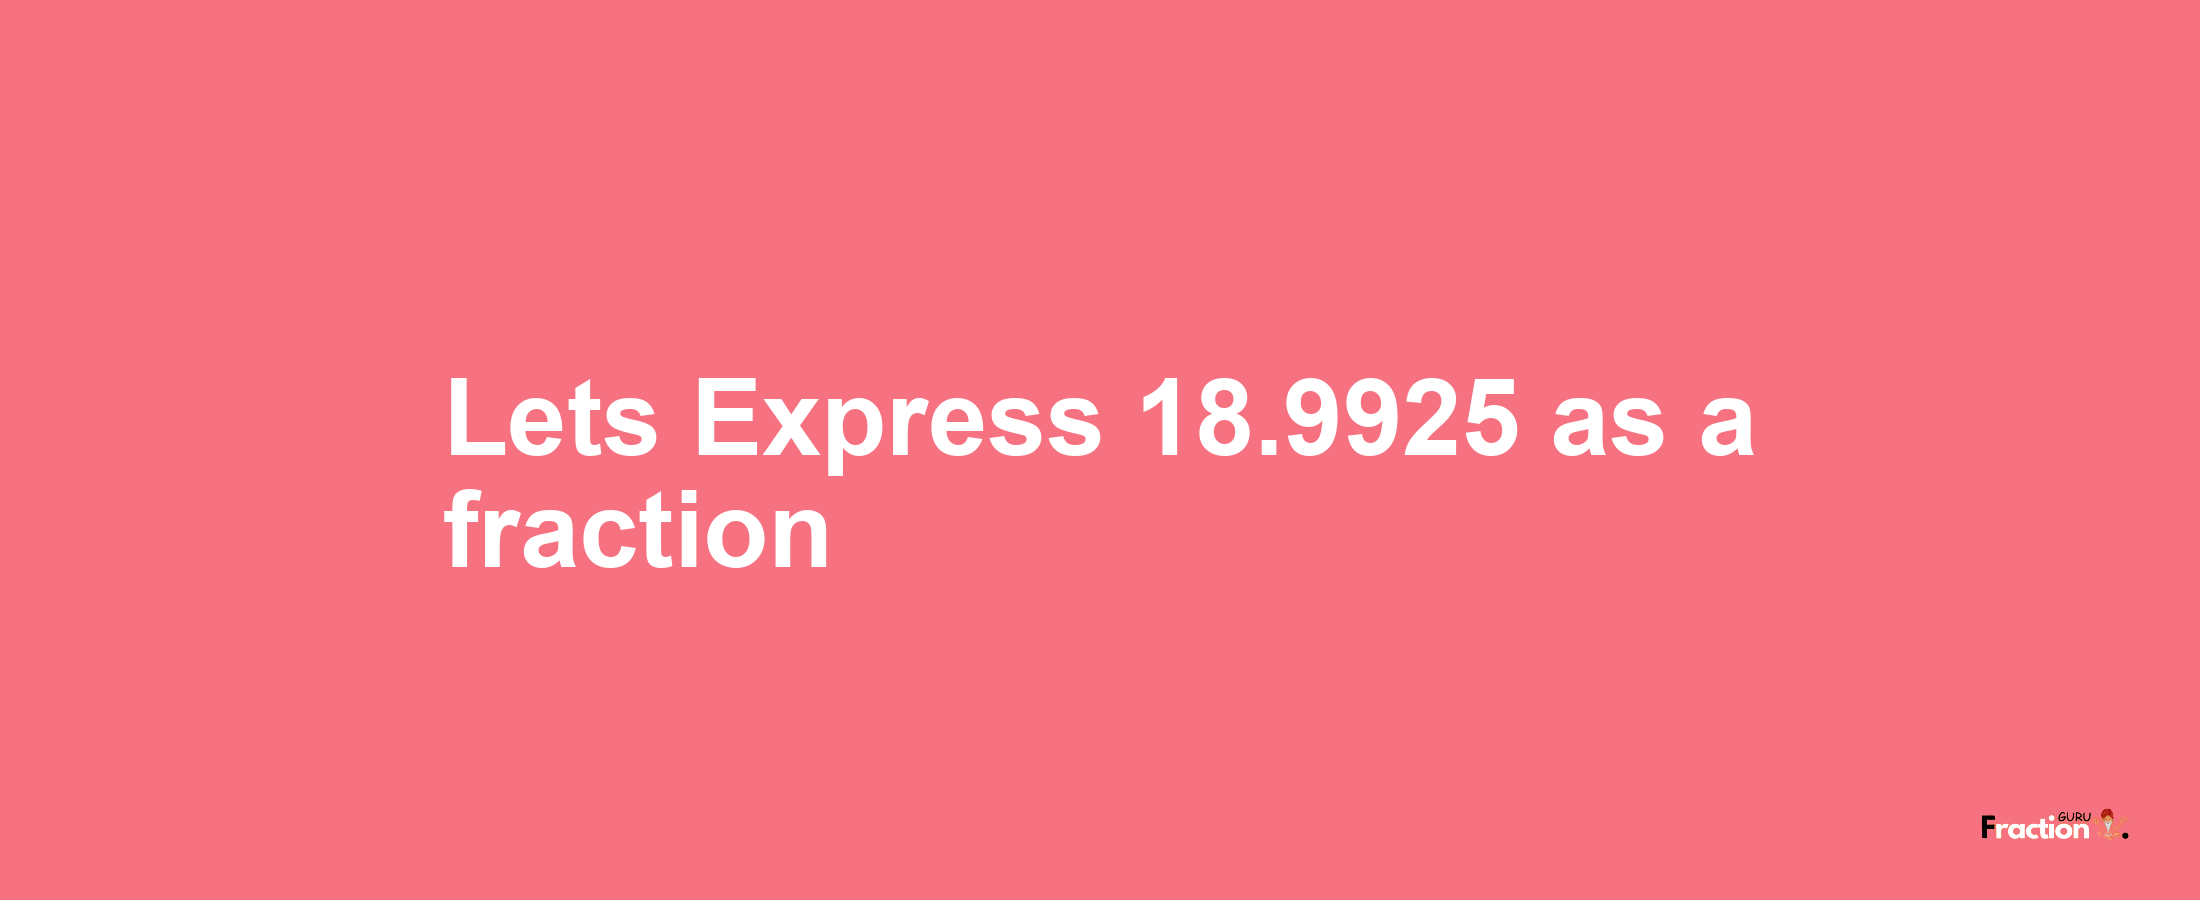 Lets Express 18.9925 as afraction